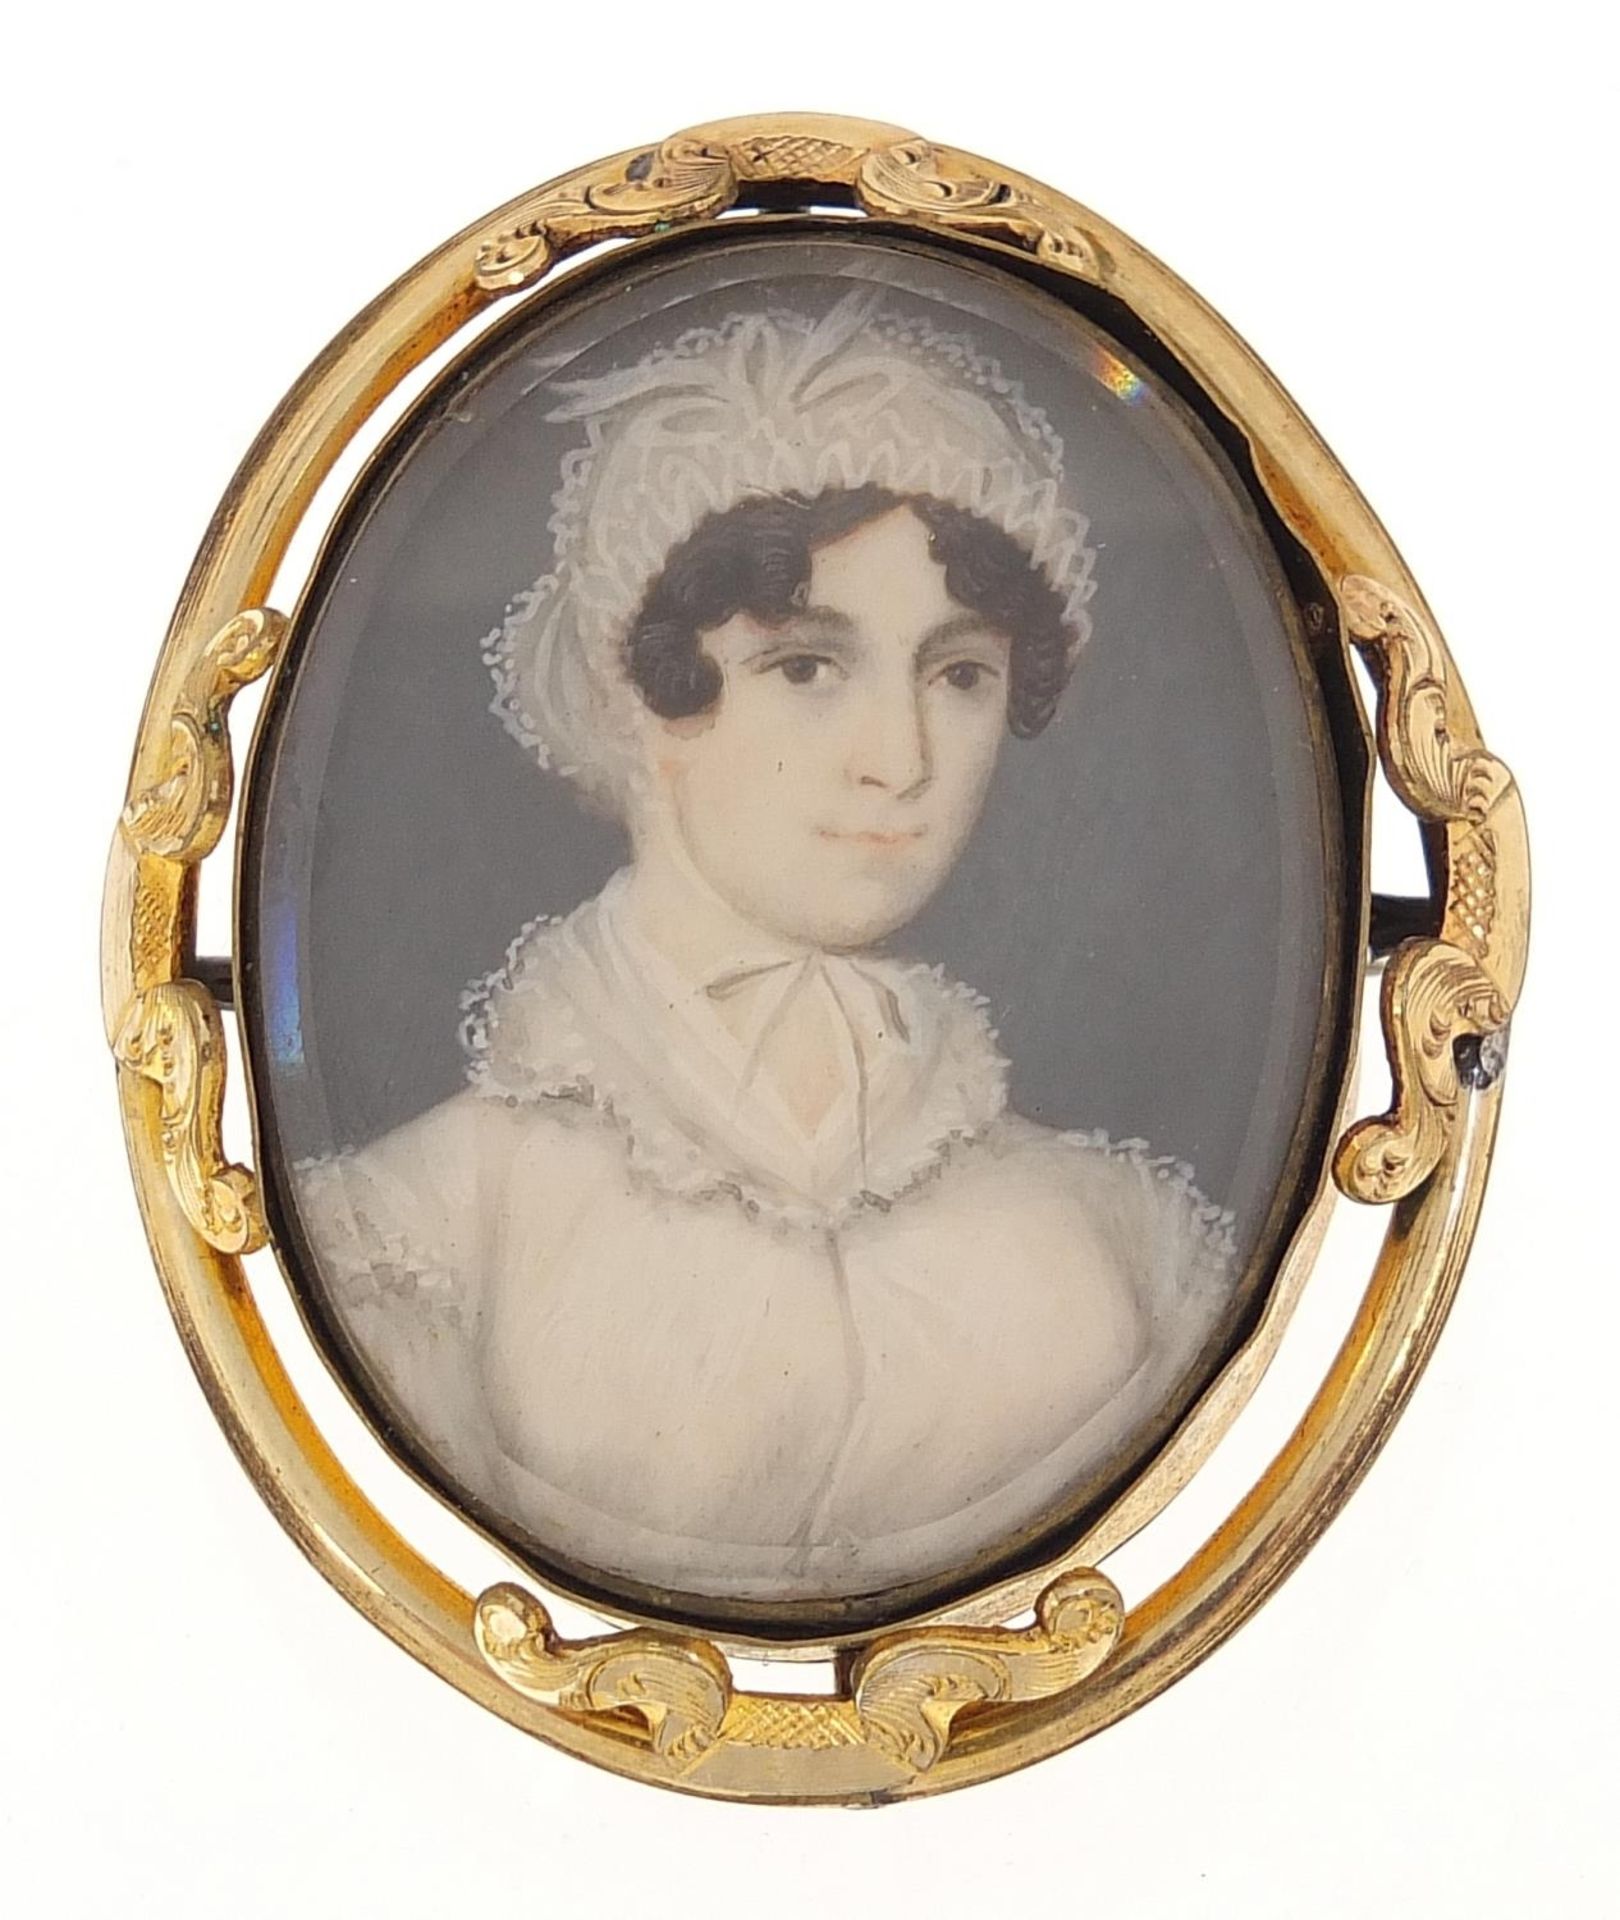 Oval hand painted portrait miniature of a female in Georgian dress housed in a gilt metal brooch